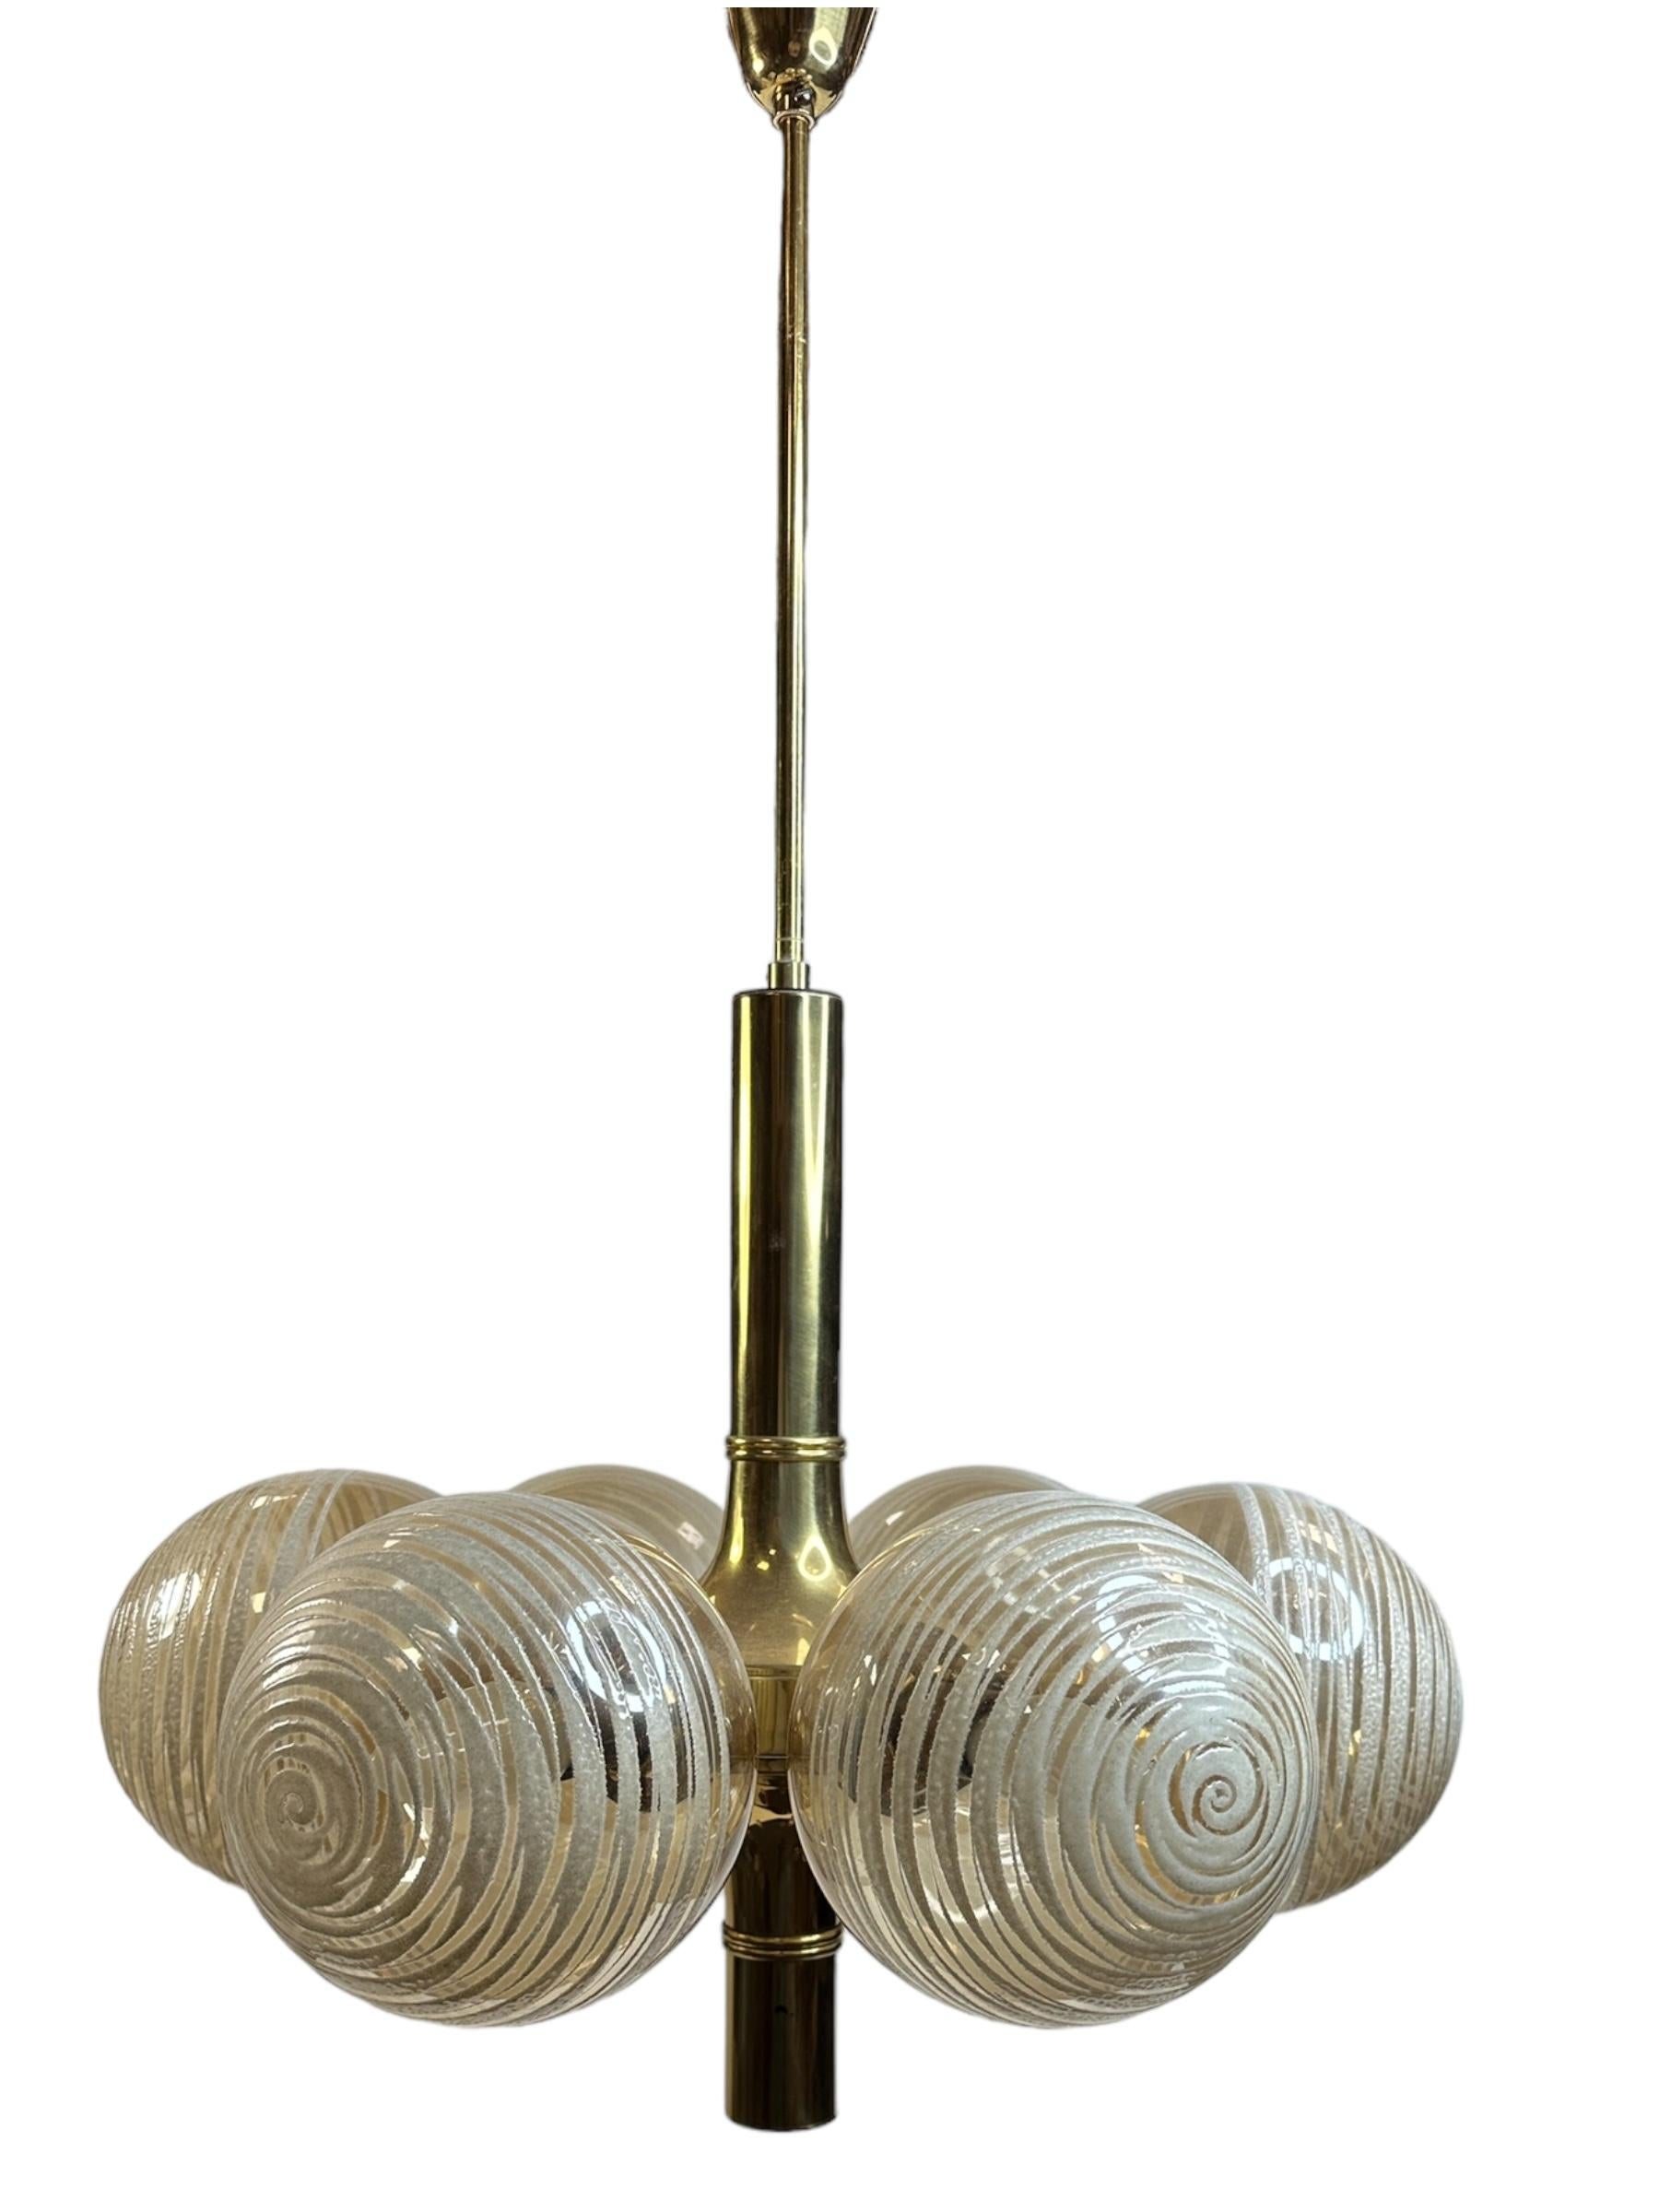 Very decorative and beautiful chandelier made of brass, fitted with six E14 sockets with swirl glass ball shades. Vintage chandelier made of gilt brass and amber colored glass of exceptional beauty is perfect for installation on the ceiling of a